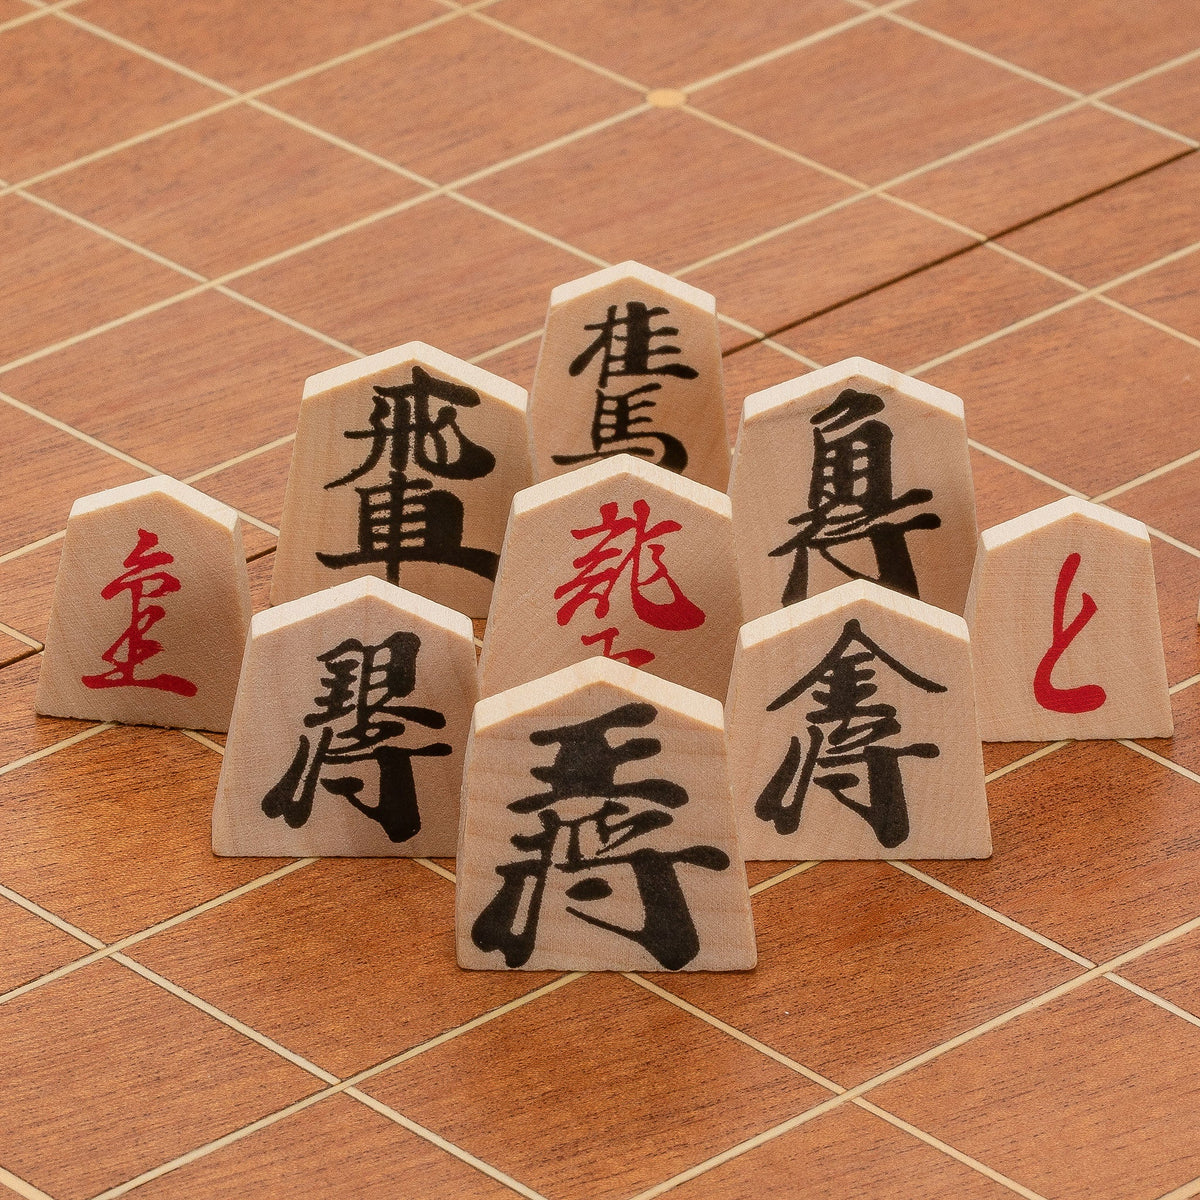 My repainted edition of Shogi (English characters) some promoted